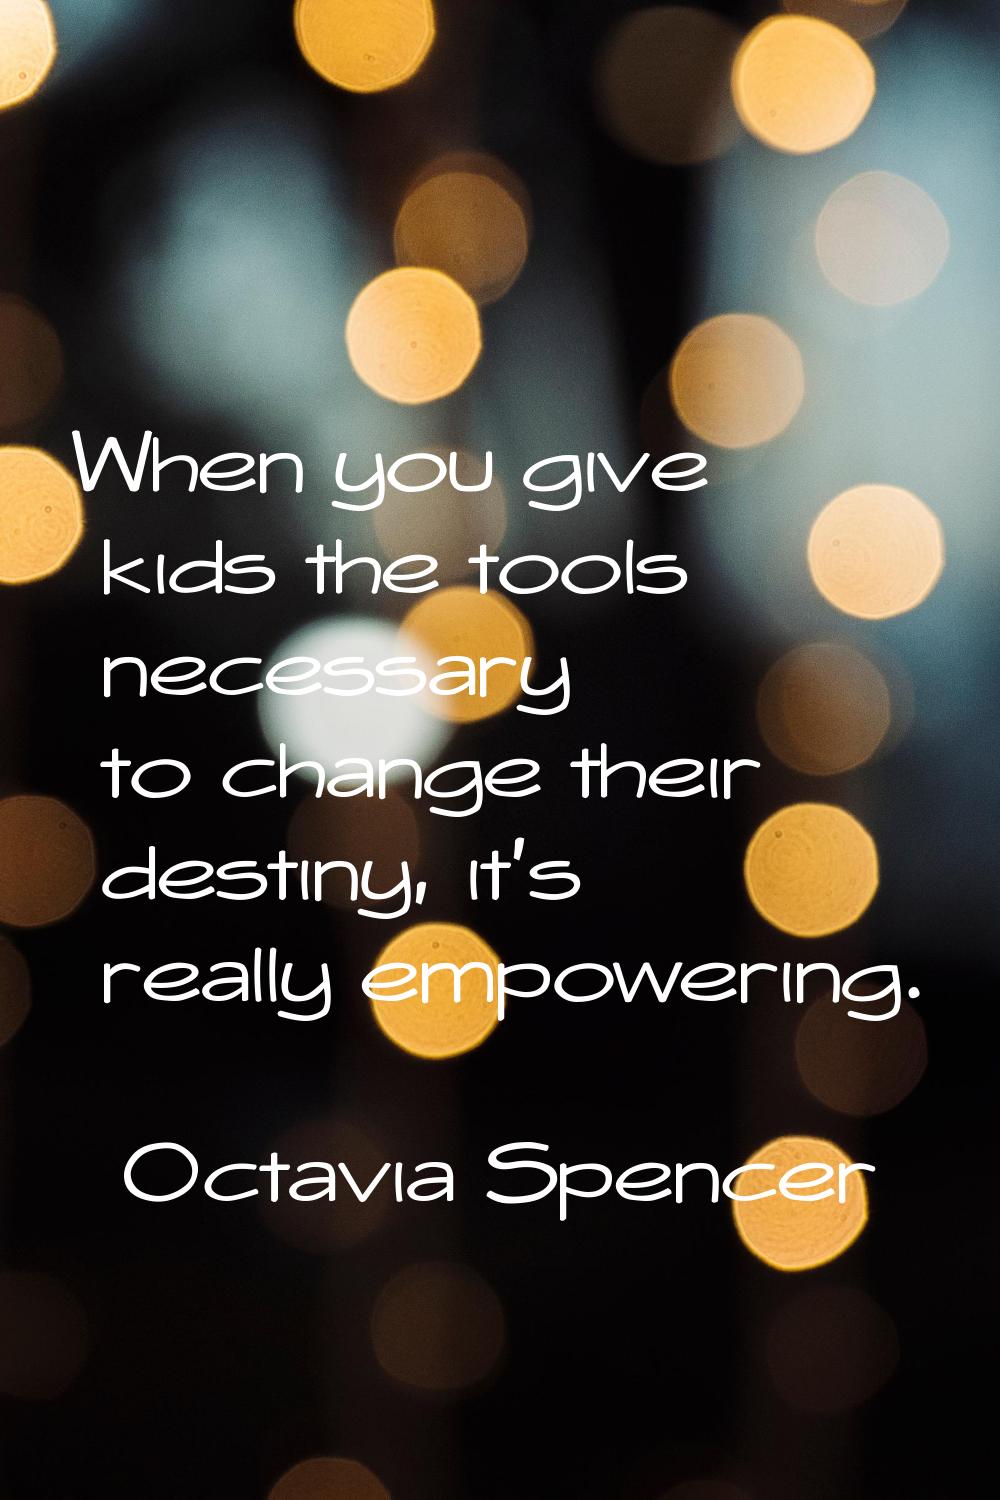 When you give kids the tools necessary to change their destiny, it's really empowering.